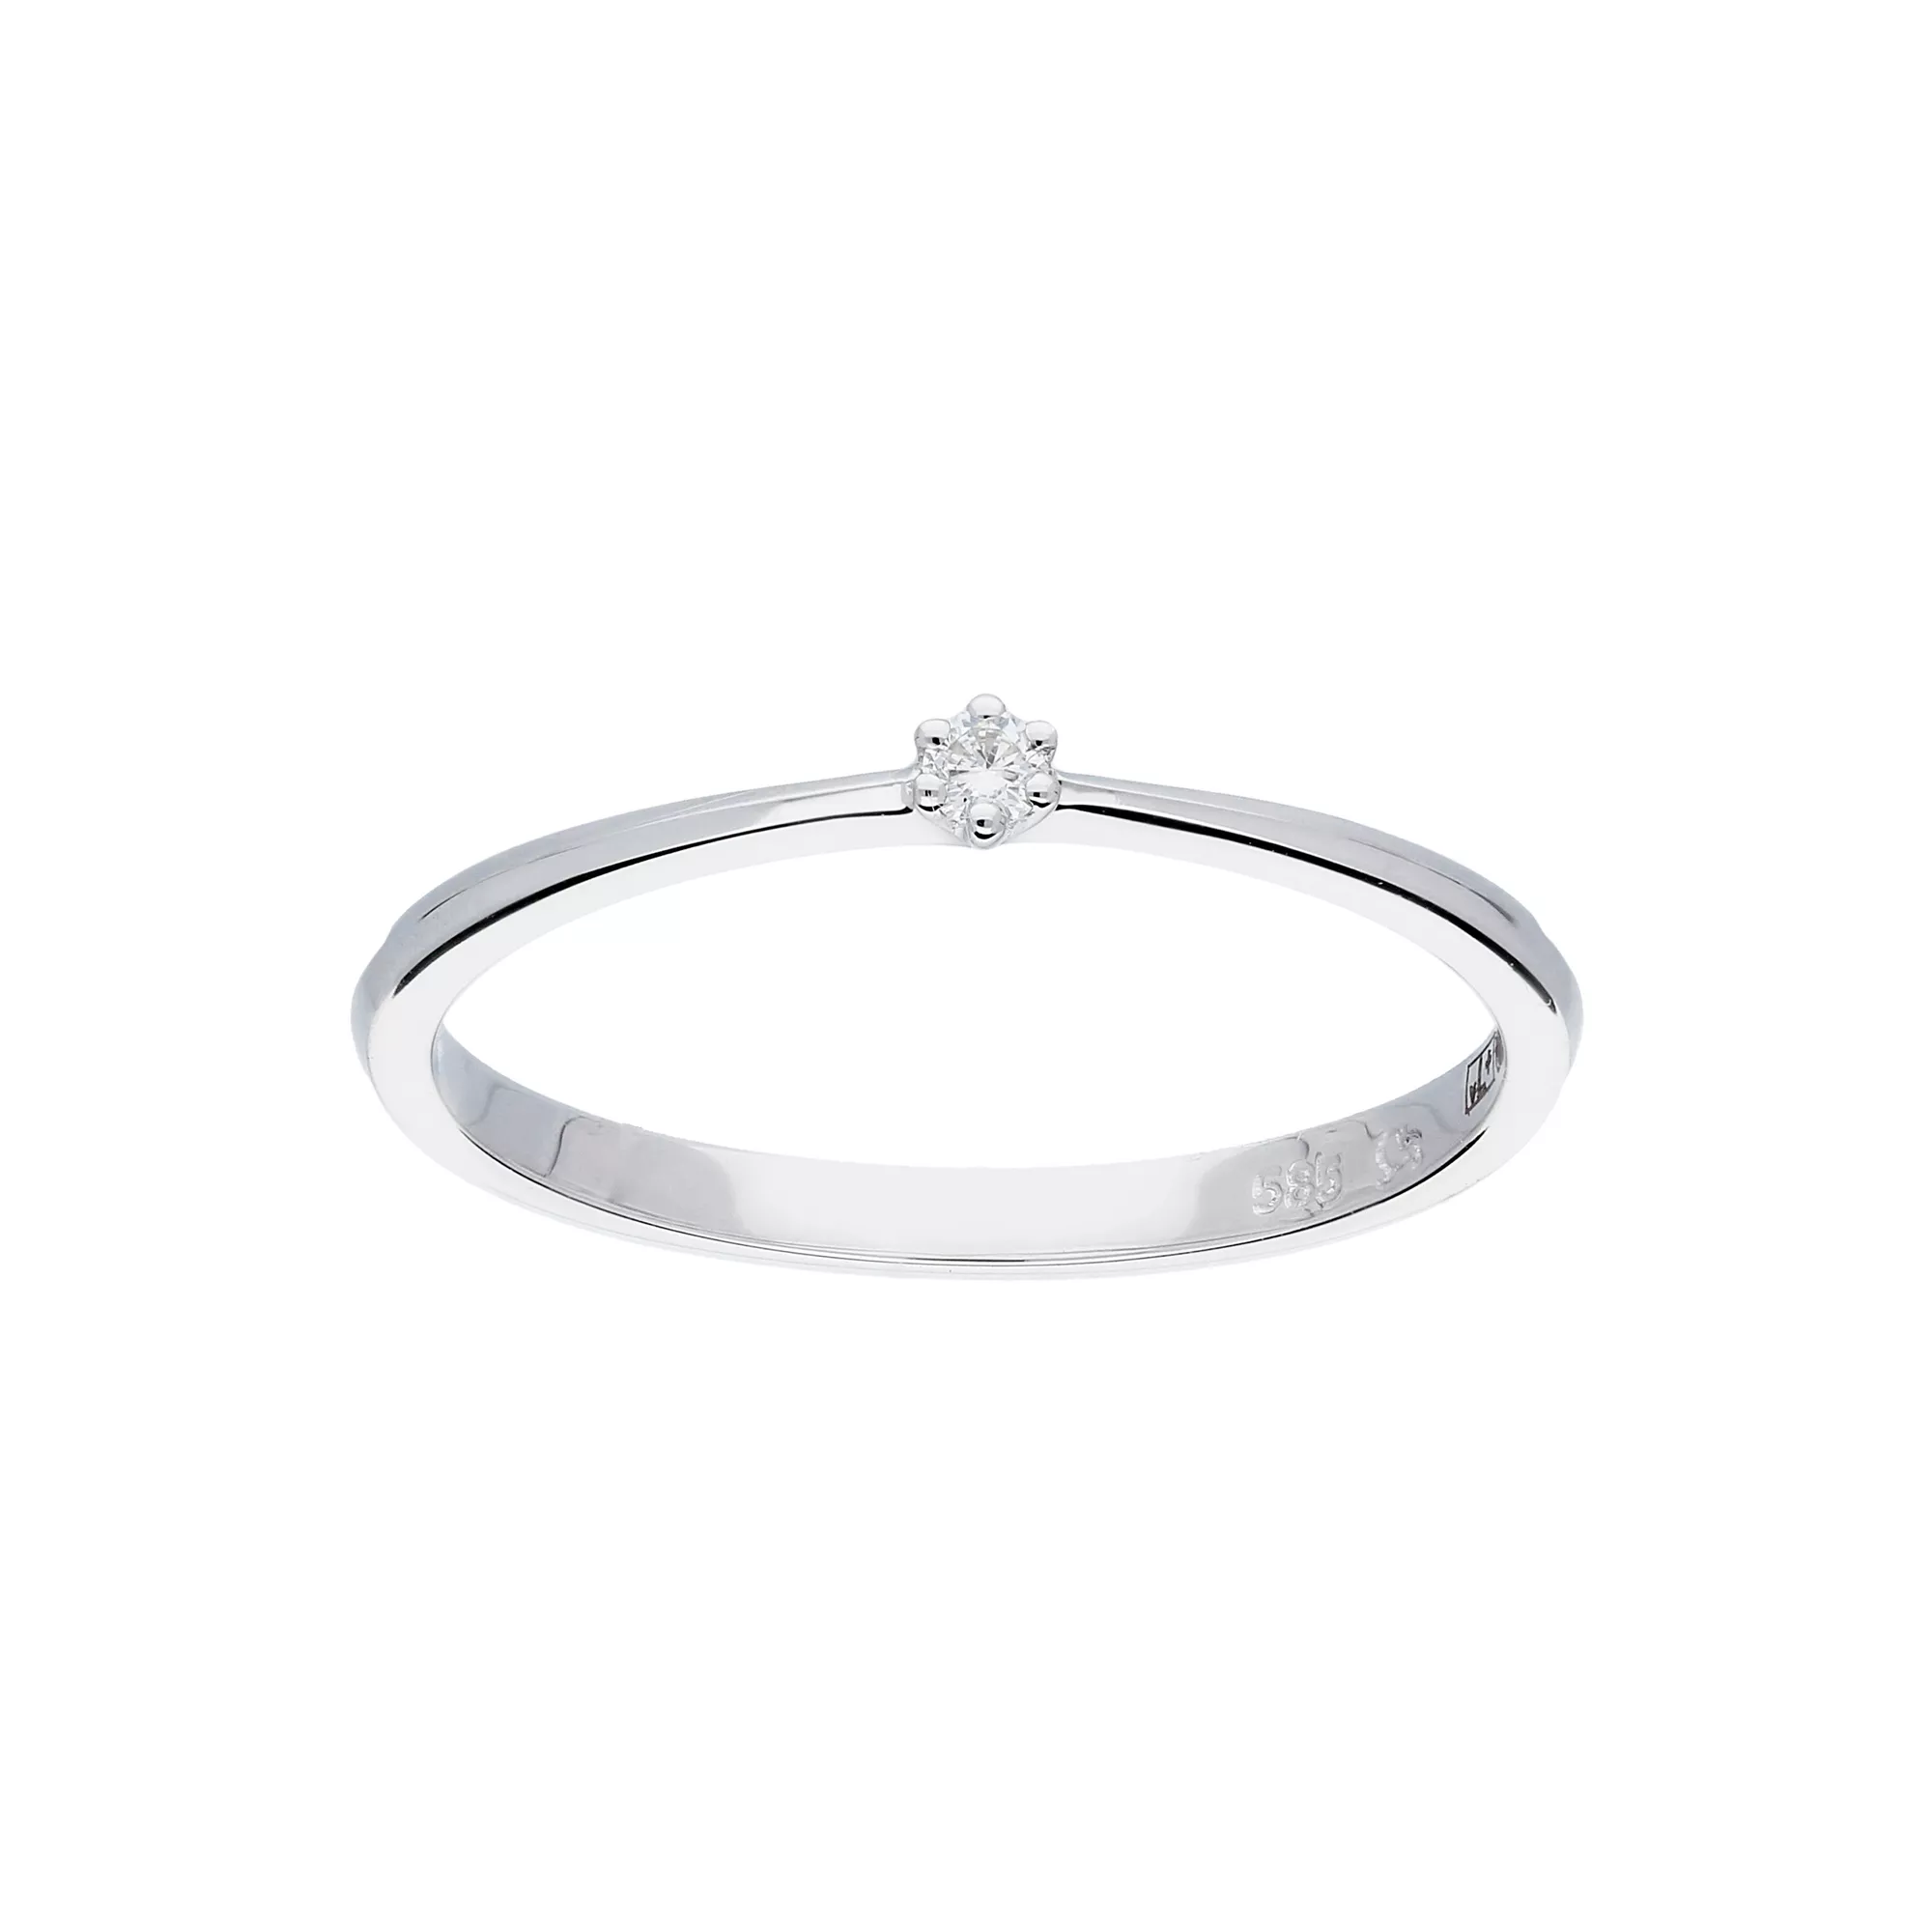 Glow Witgouden Ring - Glanzend Diamant 1-0.03ct G/si 214.3008.52